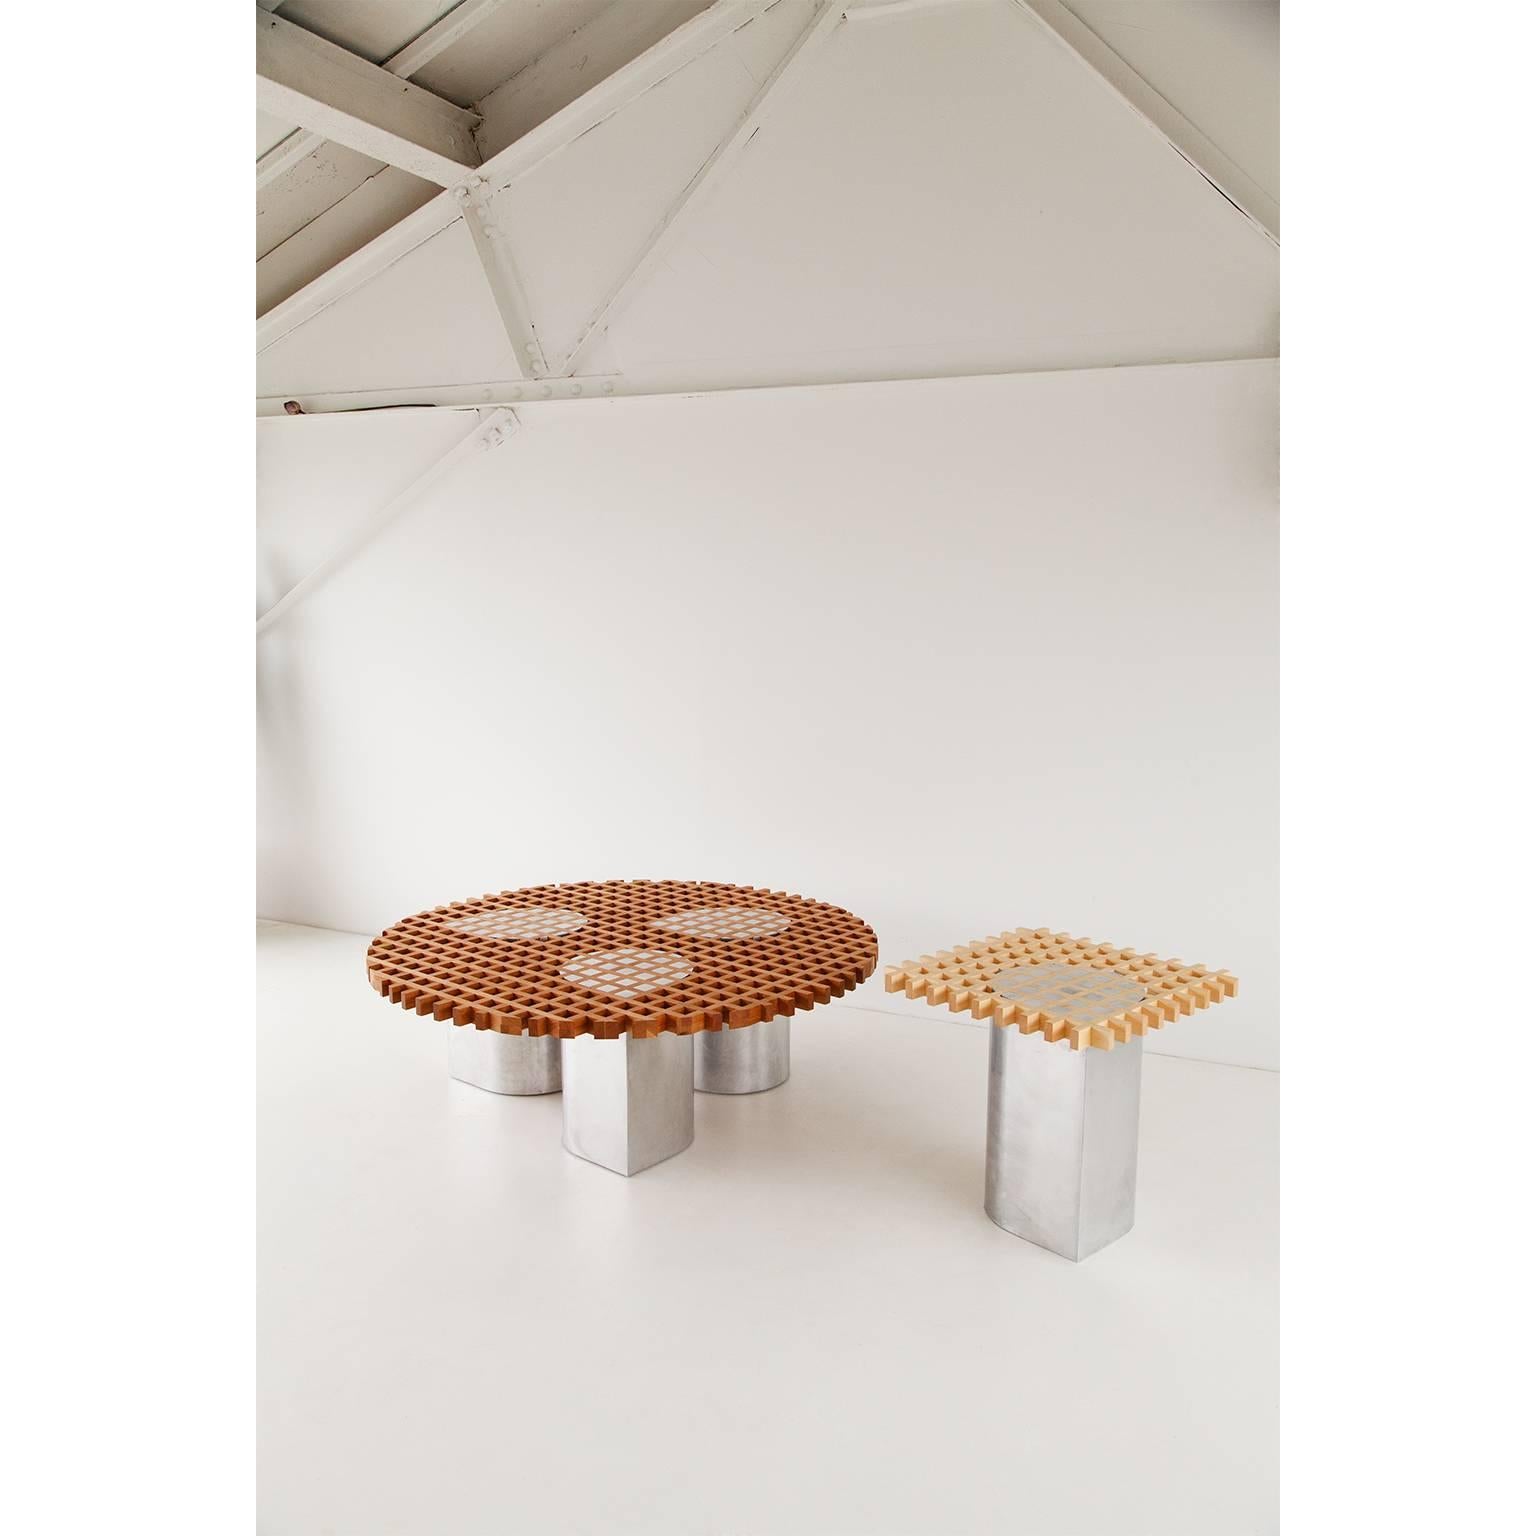 Modern Sonia Coffee Table or Side Table, Cherry Grid Pattern and Polished Aluminium